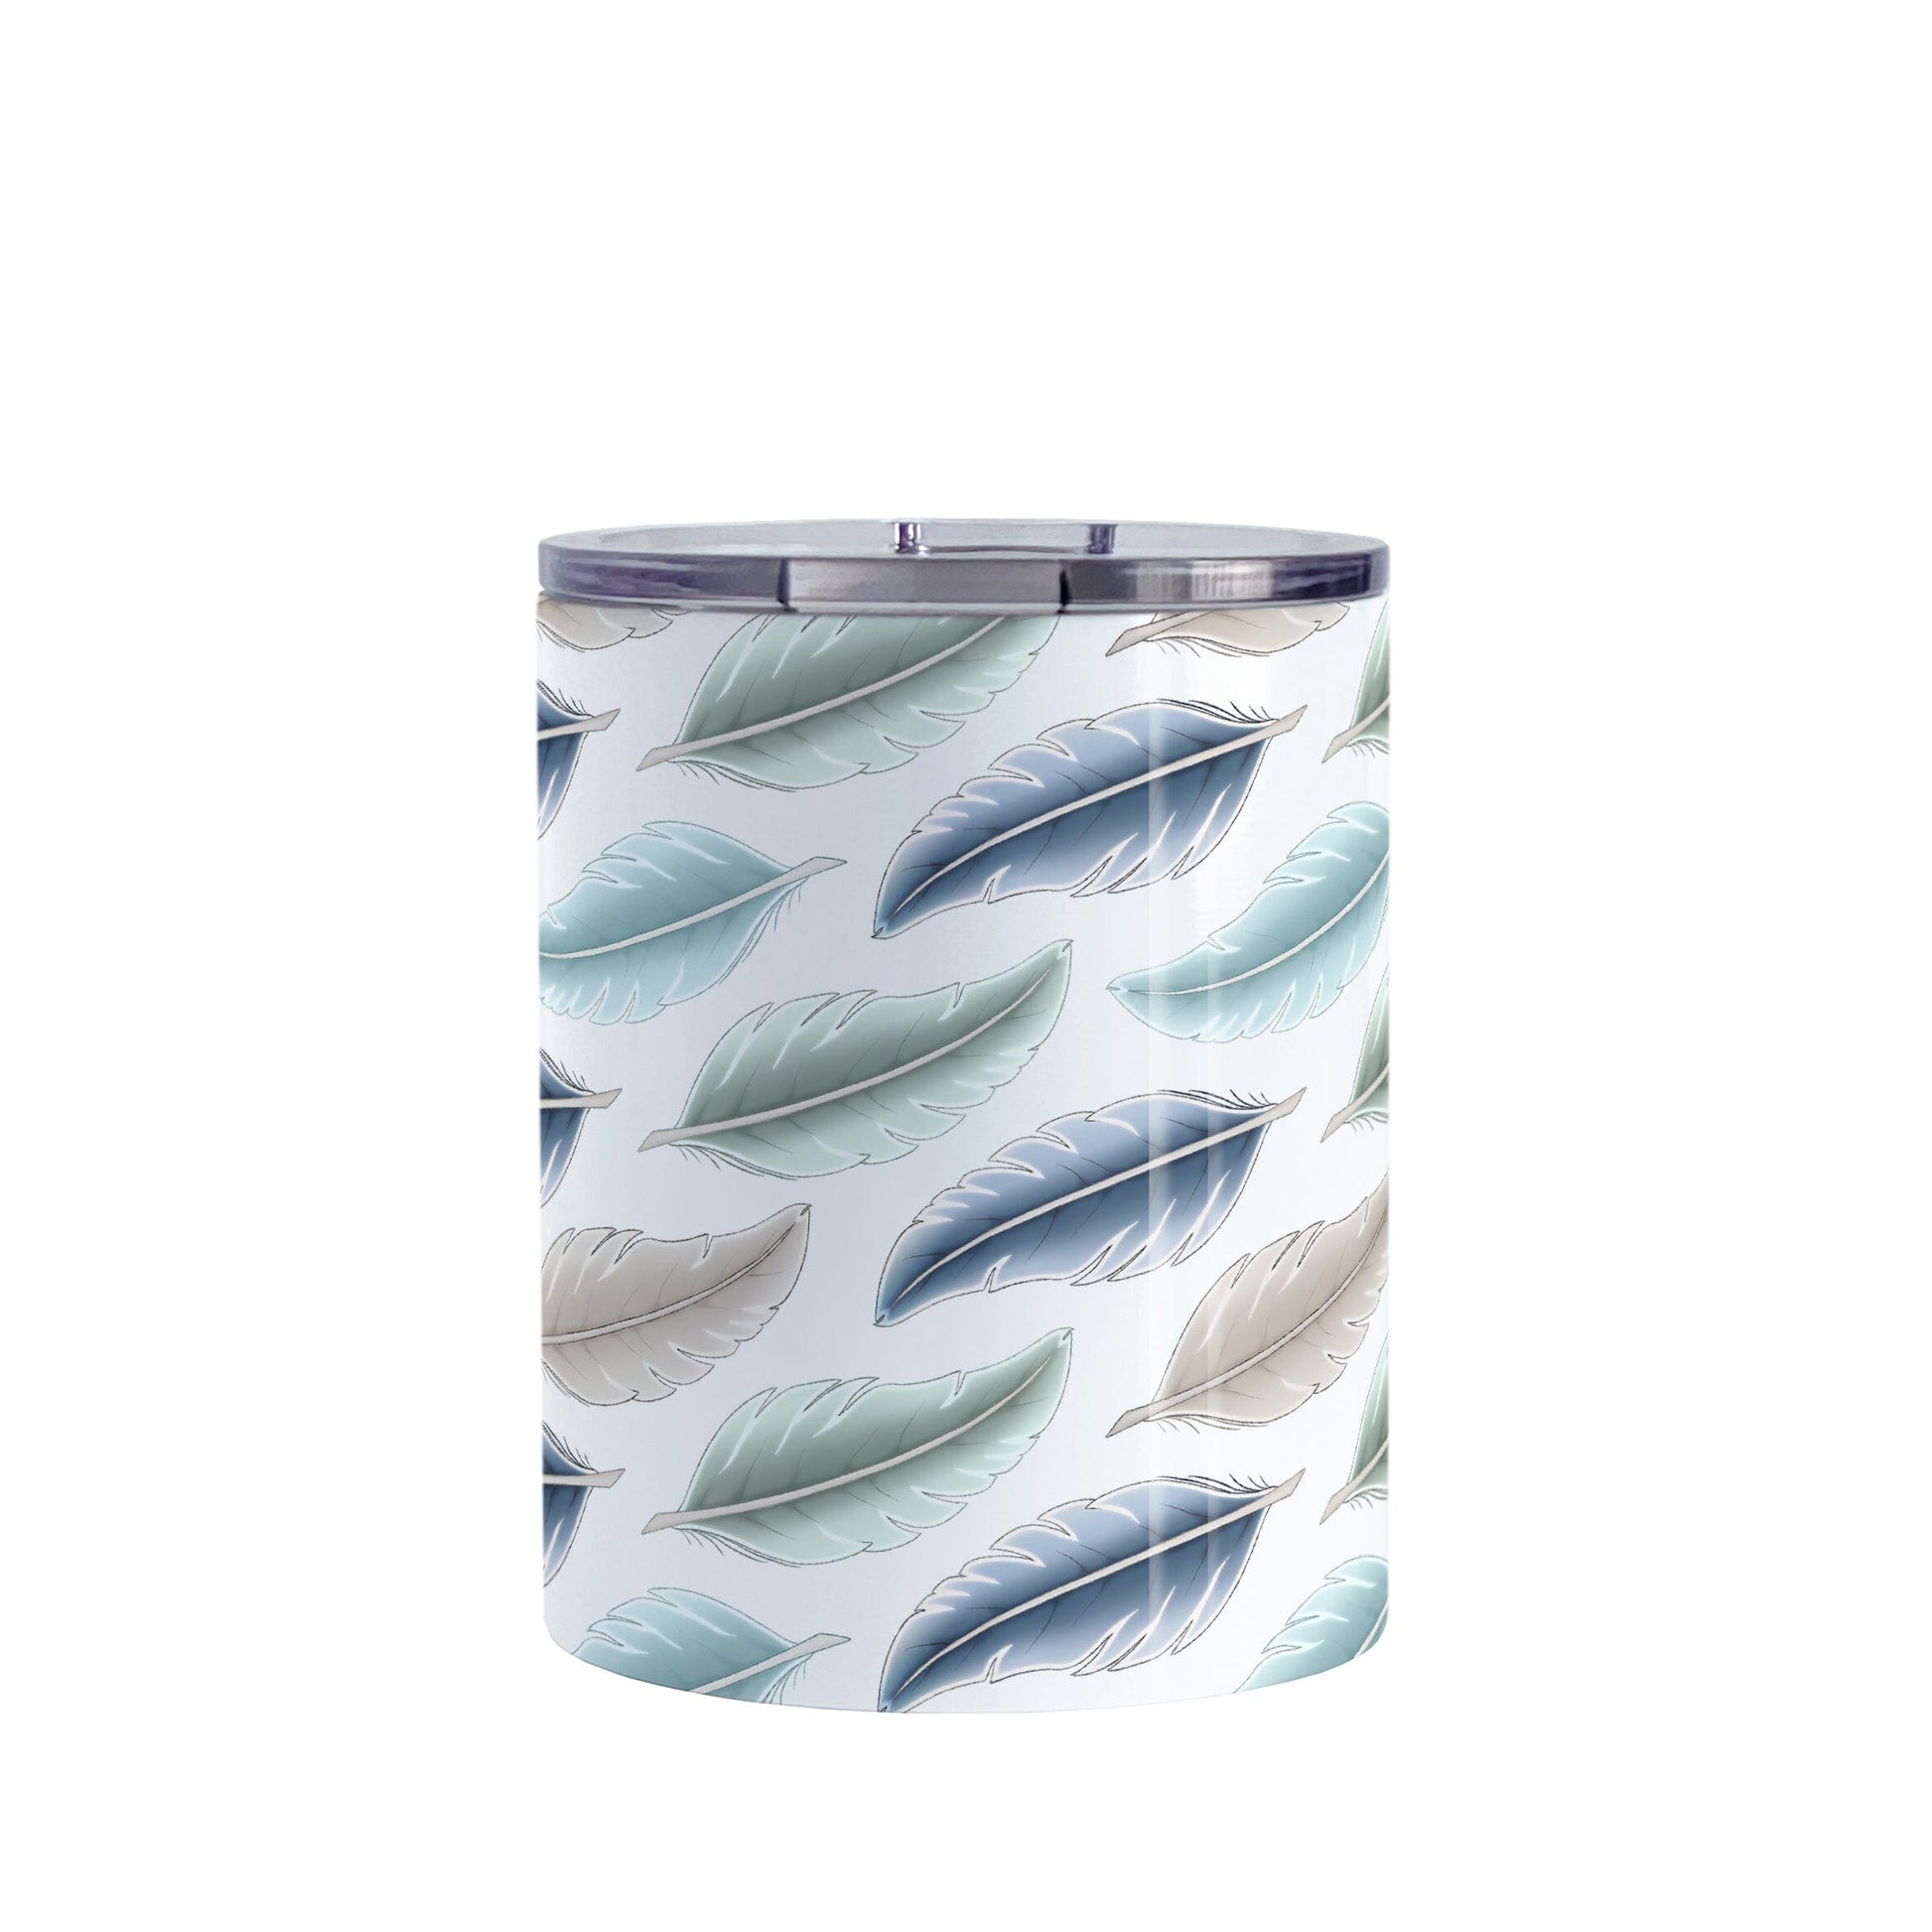 Coastal Feathers Tumbler Cup (10oz) at Amy's Coffee Mugs. A stainless steel tumbler cup designed with a pattern of feathers in a coastal color scheme that wraps around the cup.